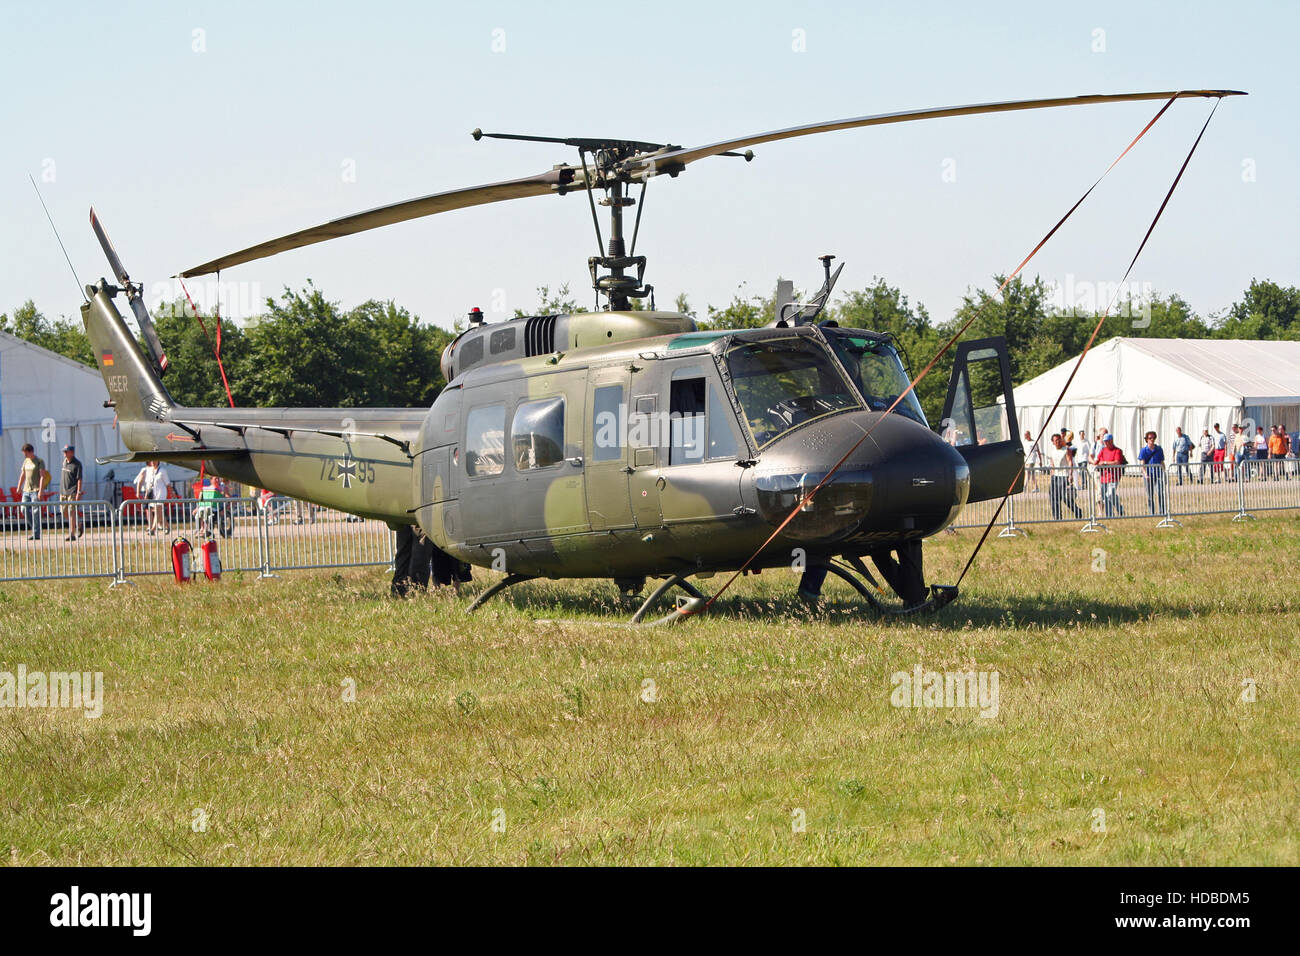 German Army Bell/Dornier UH-1D Iroquois helicopter Stock Photo